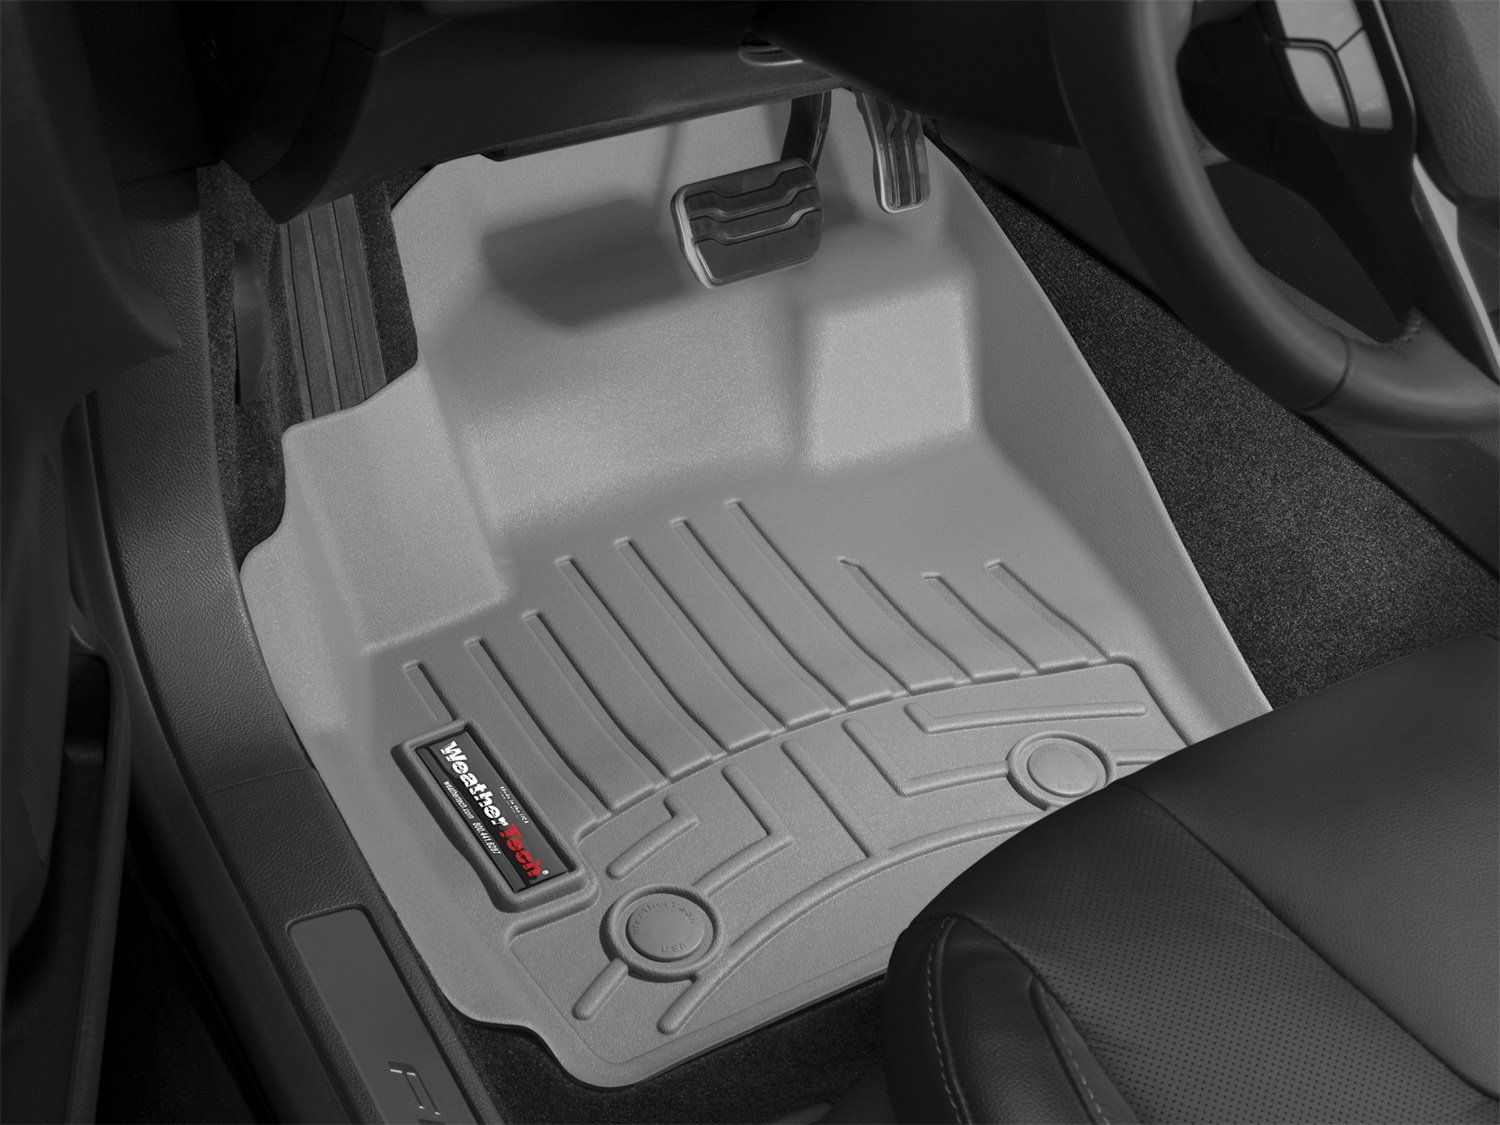 FRONT FLOORLINER GREY JEEP GRAND CHEROKEE 2015 FITS VEHICLES MANUFACTURED MARCH 2015 OR LATER